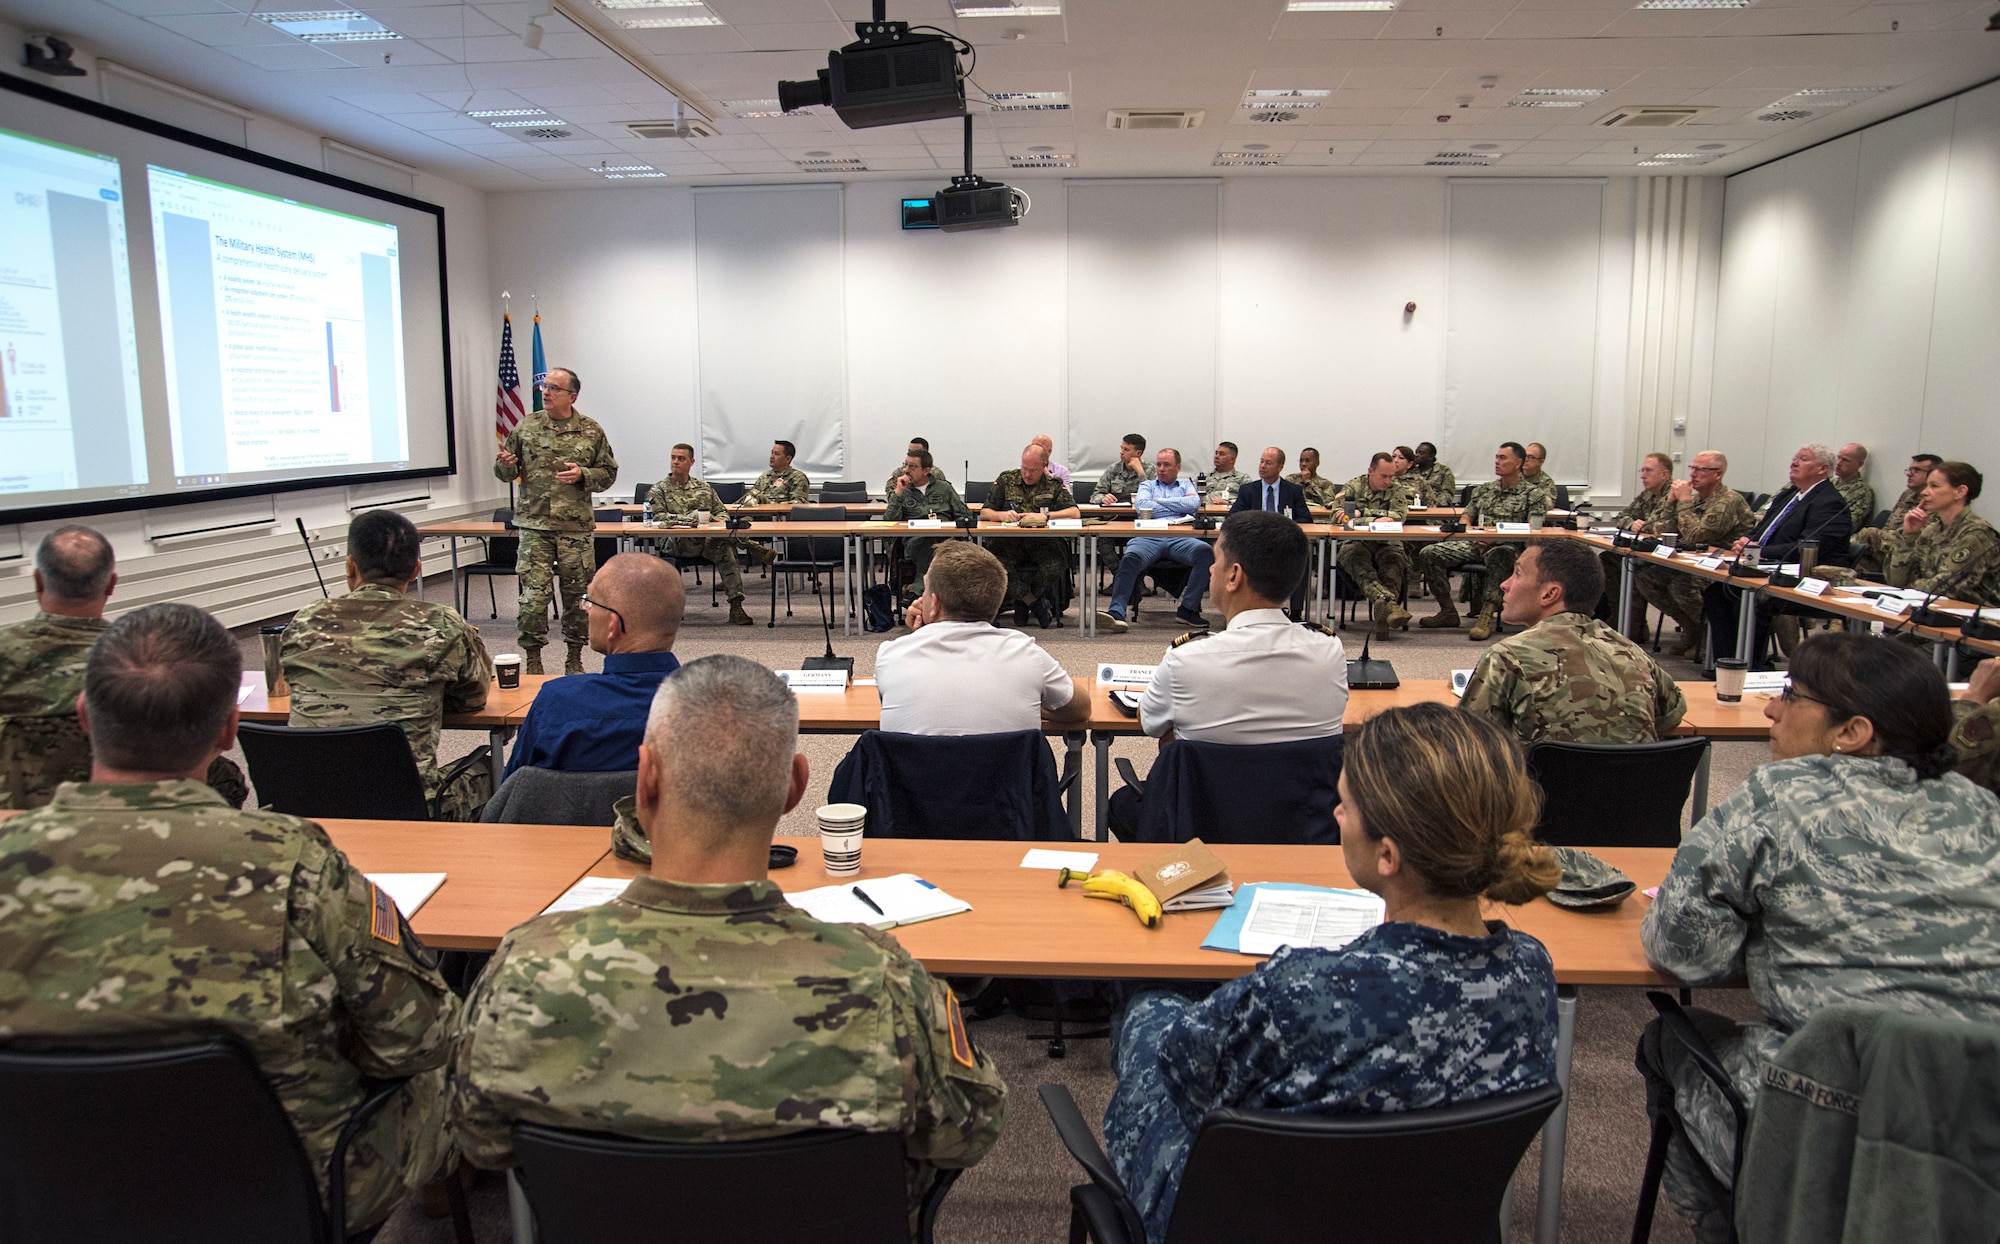 Attendees listen to a brief on the upcoming changes to the military health system during day one of the 2019 U.S. Africa Command Surgeon Synchronization Conference in Stuttgart, Germany, May 28, 2019. The conference brought together medical professionals from across the command, and interagency and foreign partners, to enable collaboration and to discuss areas of concern within the medical enterprise in Africa. (U.S. Navy photo by Mass Communication Specialist 1st Class Christopher Hurd)